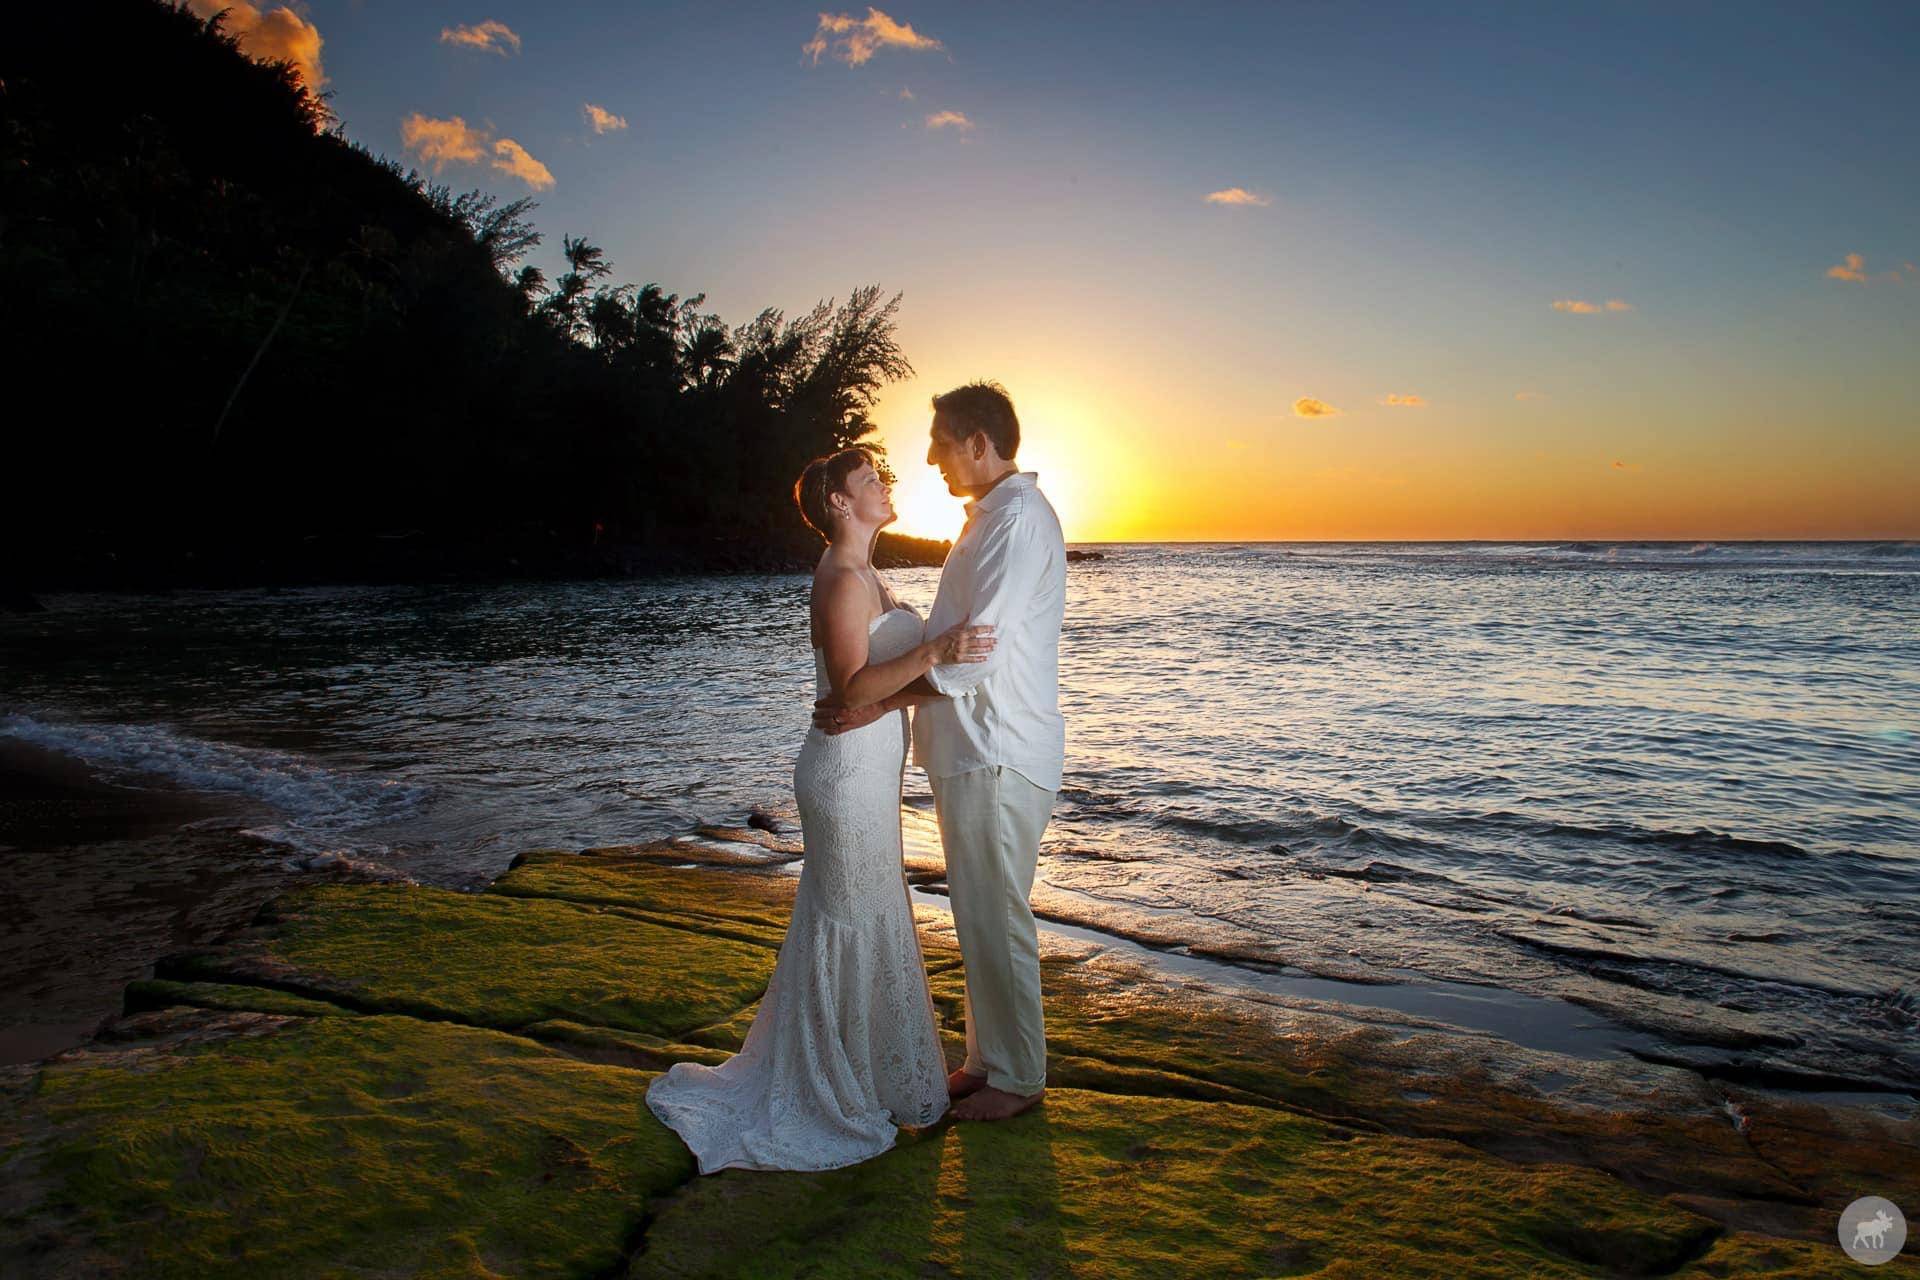 Paul and Meredith at their wedding in Hawaii in 2016.